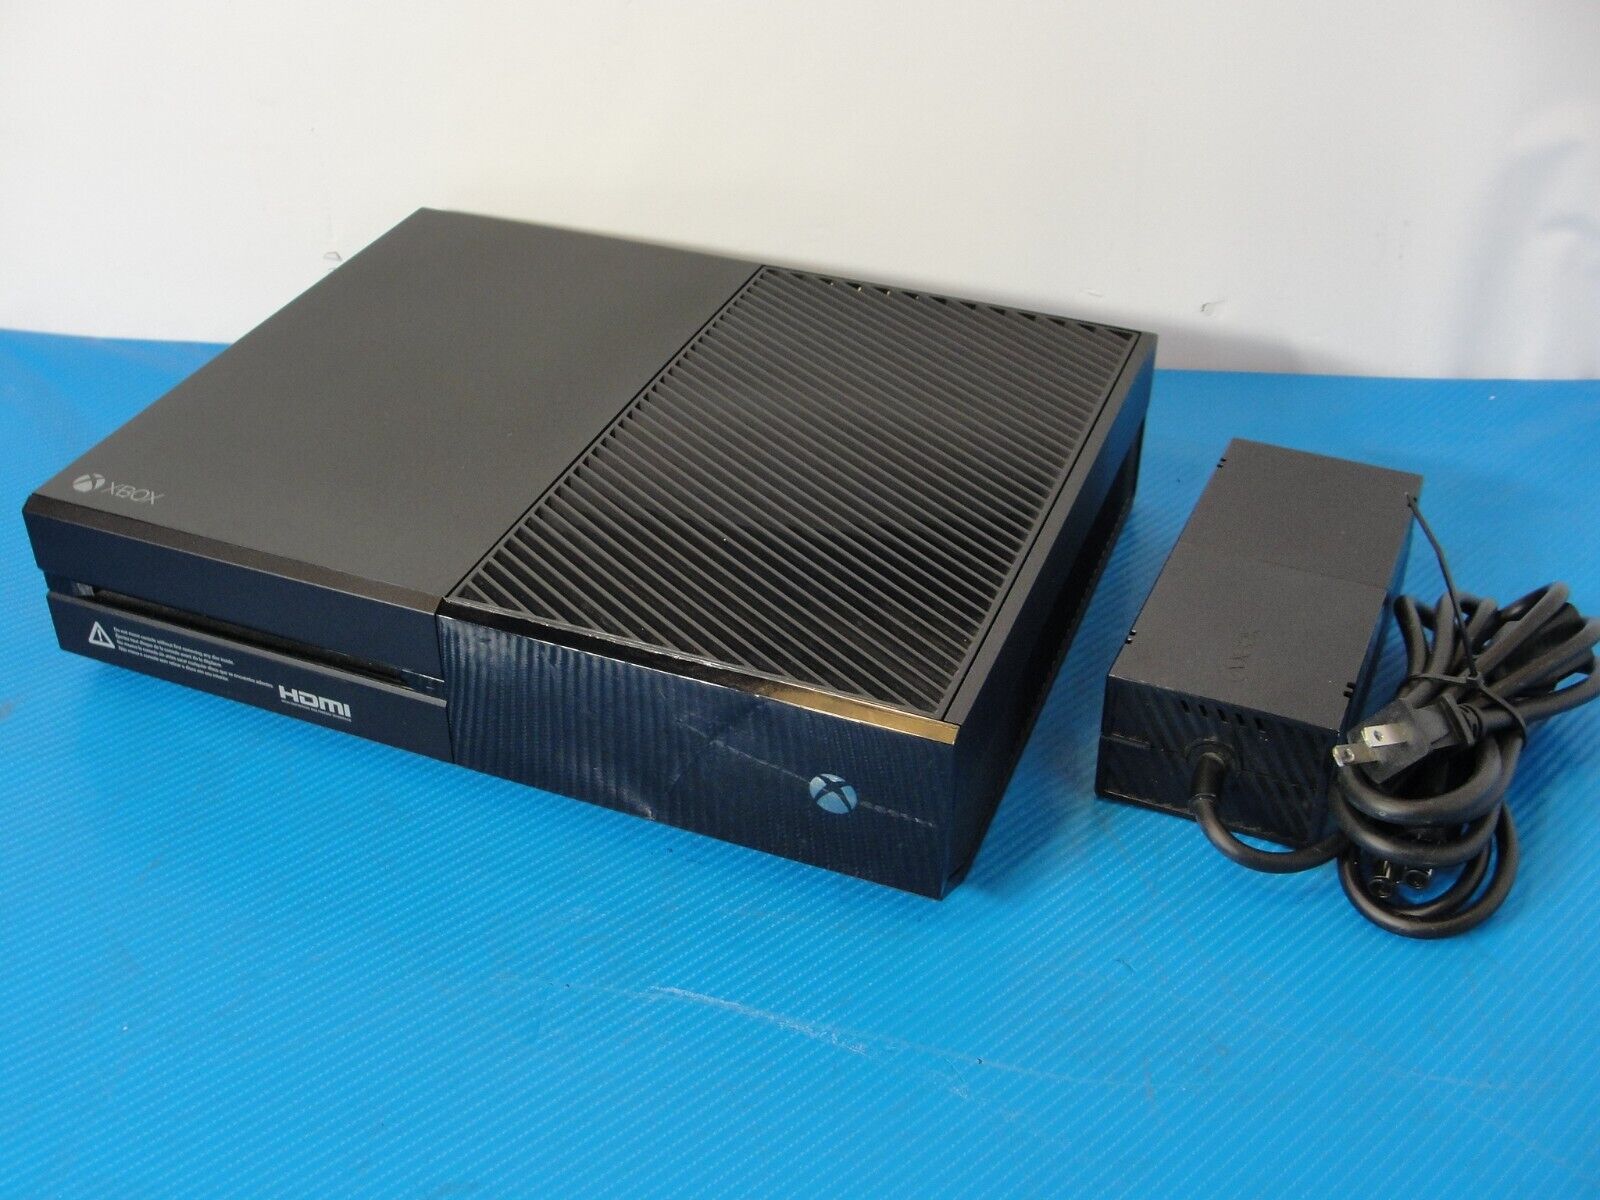 Microsoft Xbox One Original 1540 Black Console 1TB & Power Adapter /Works Great